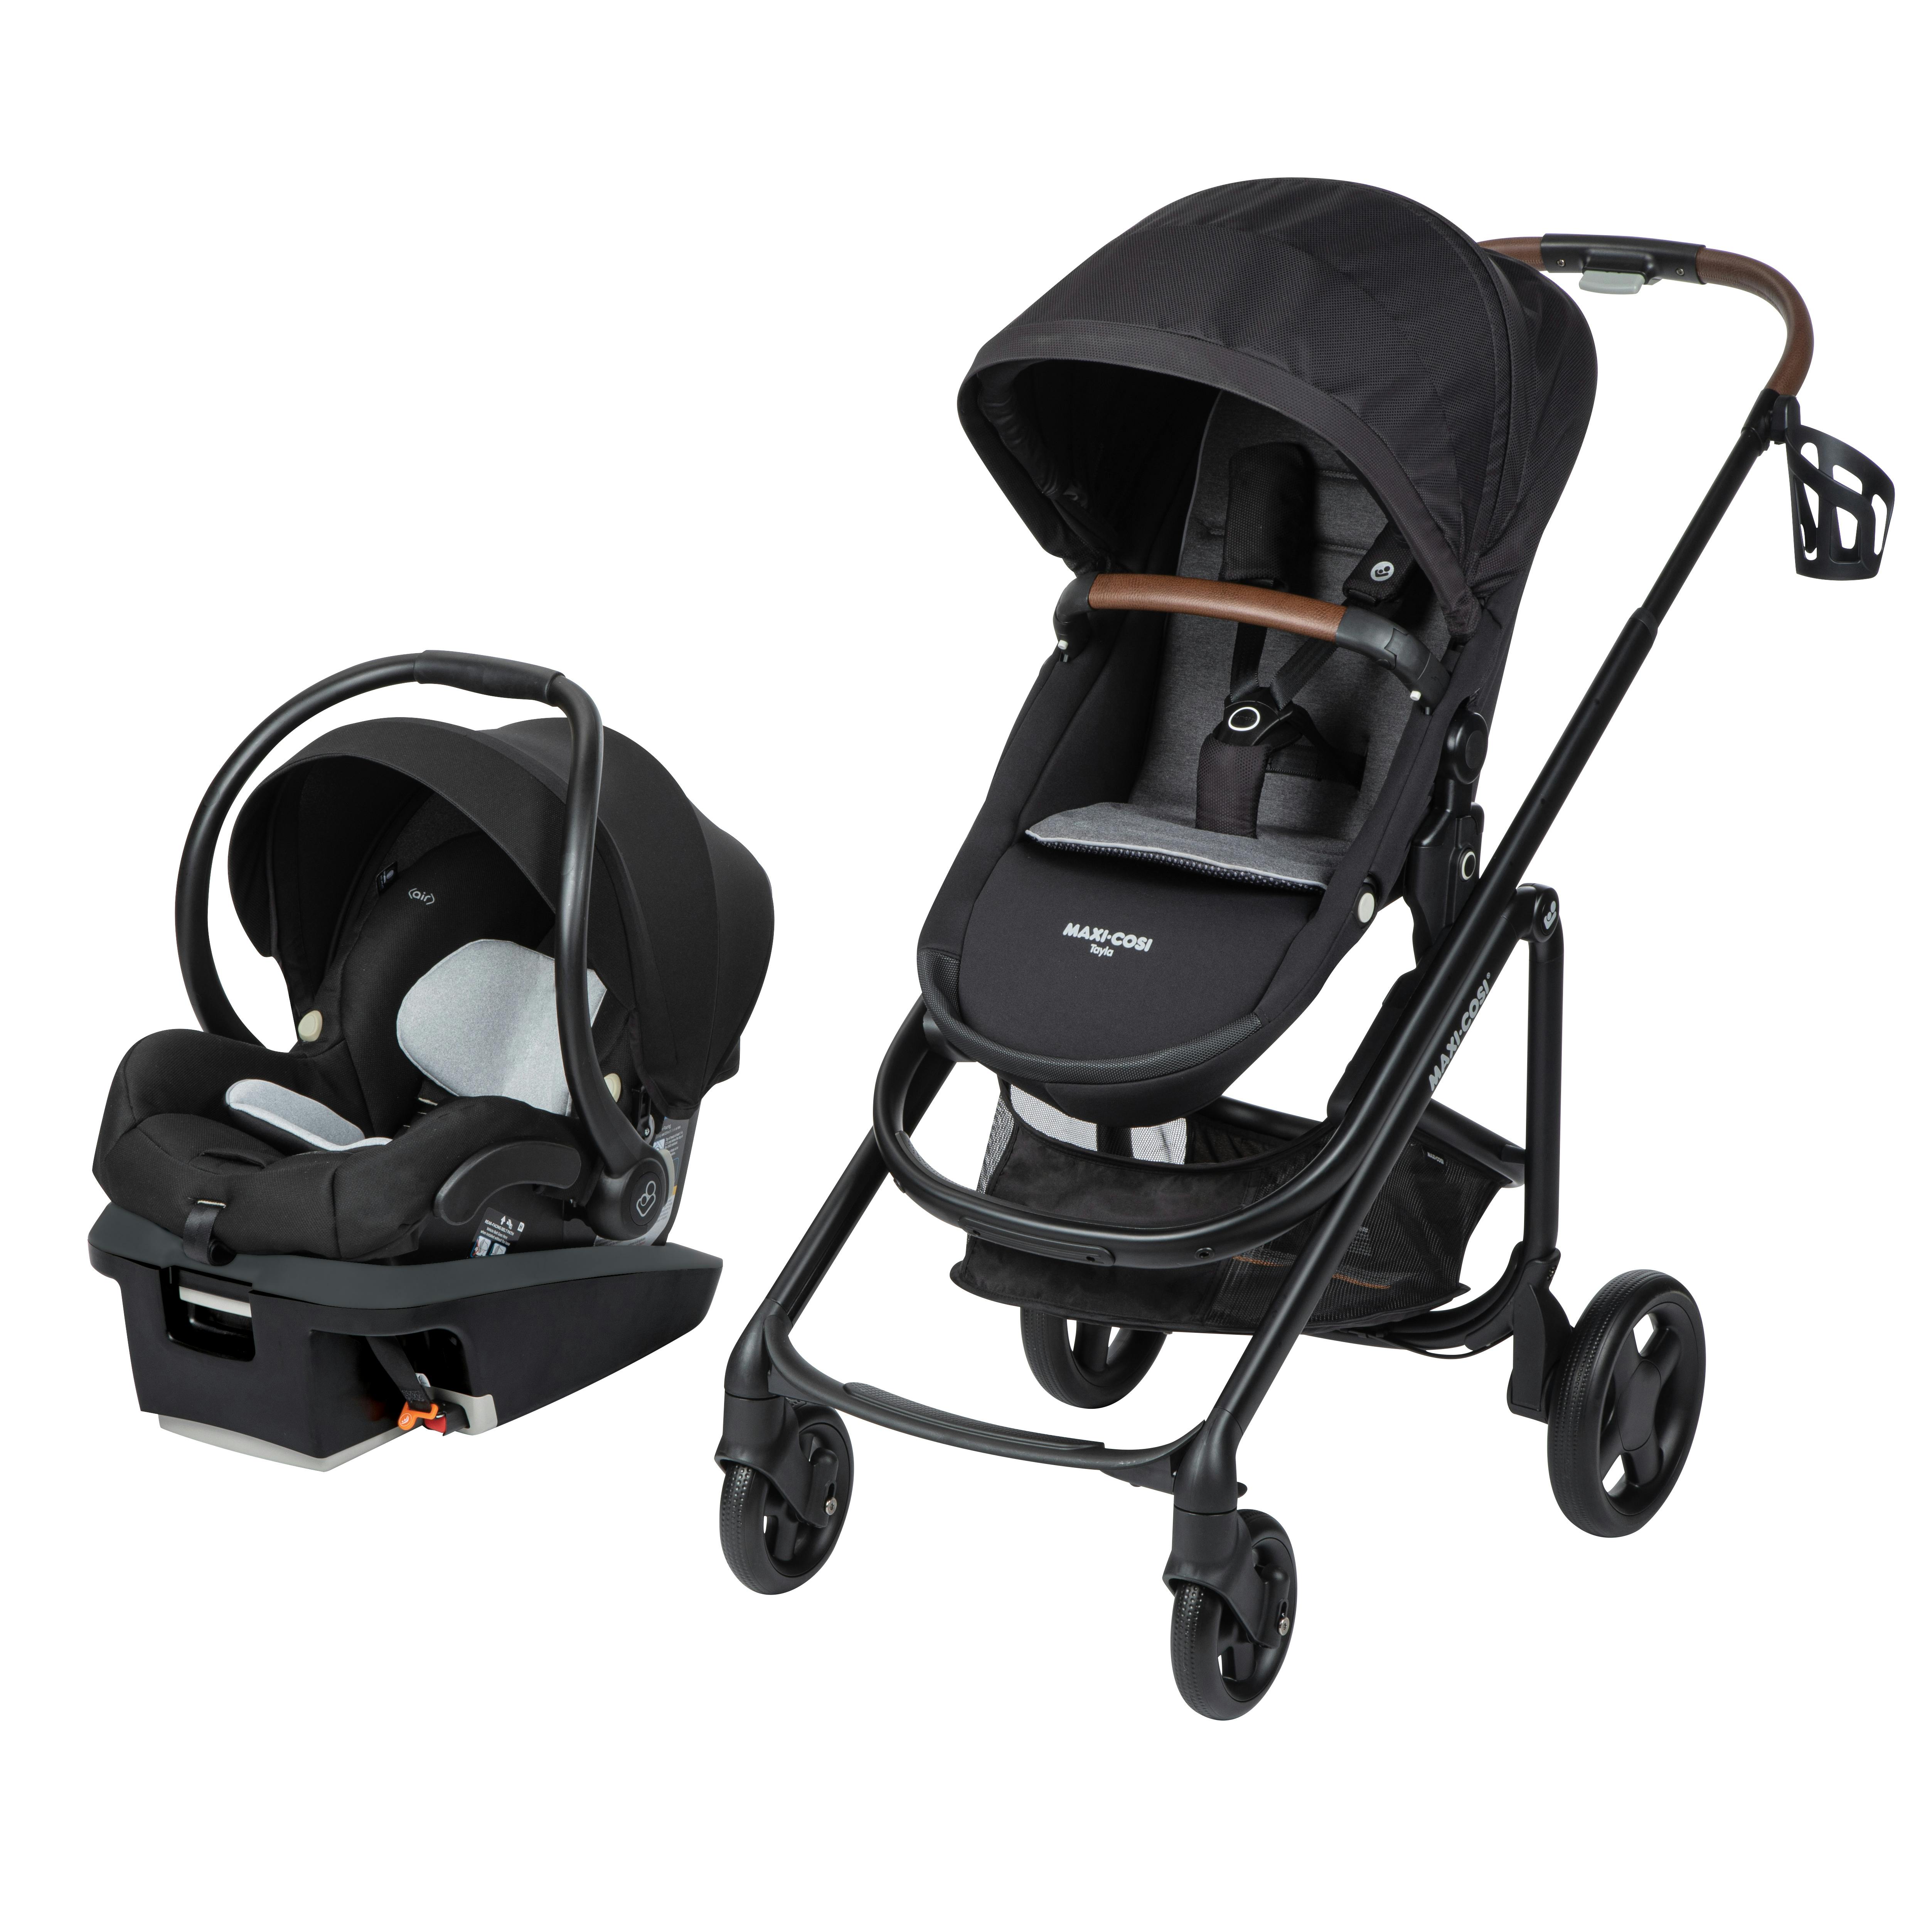 Maxi-Cosi Tayla Travel System with Mico XP